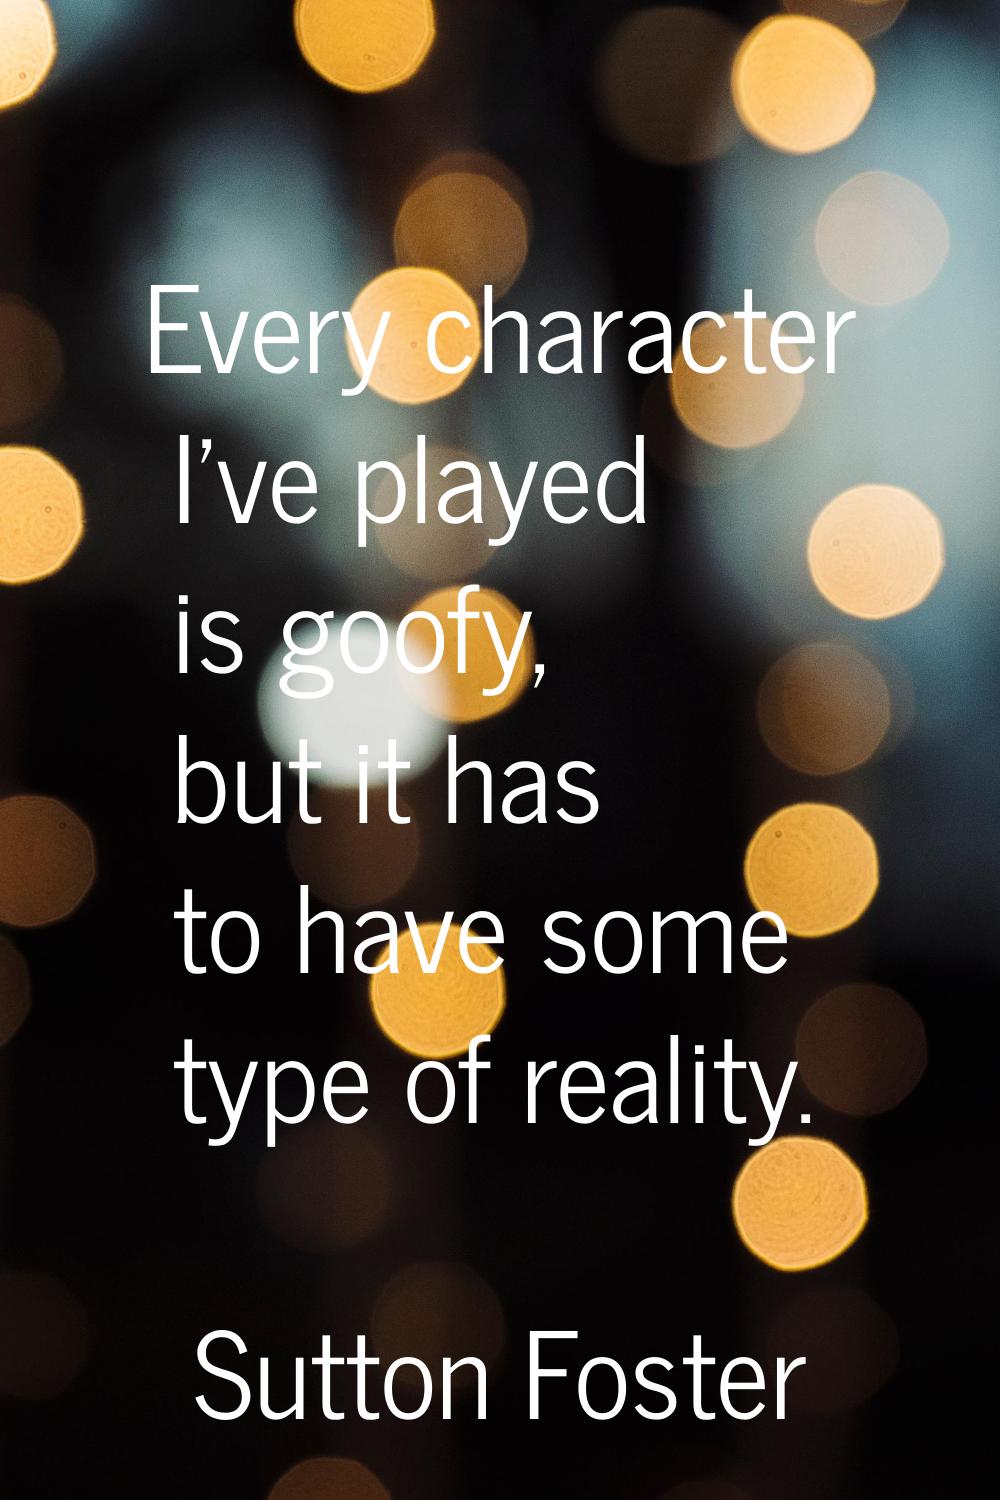 Every character I've played is goofy, but it has to have some type of reality.